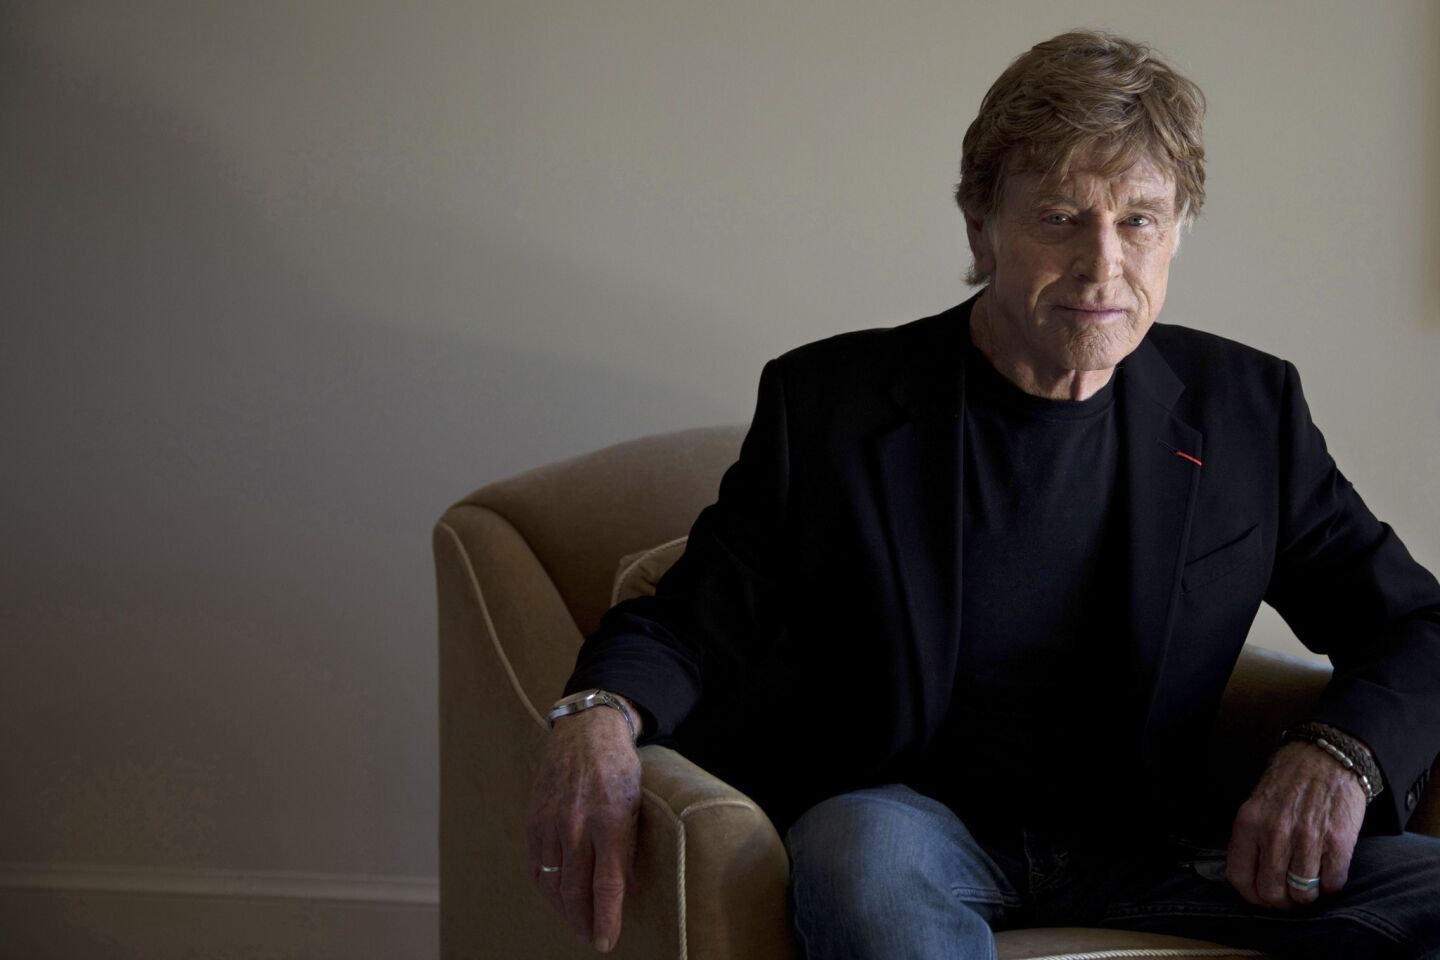 Robert Redford stars in the upcoming film "All Is Lost."